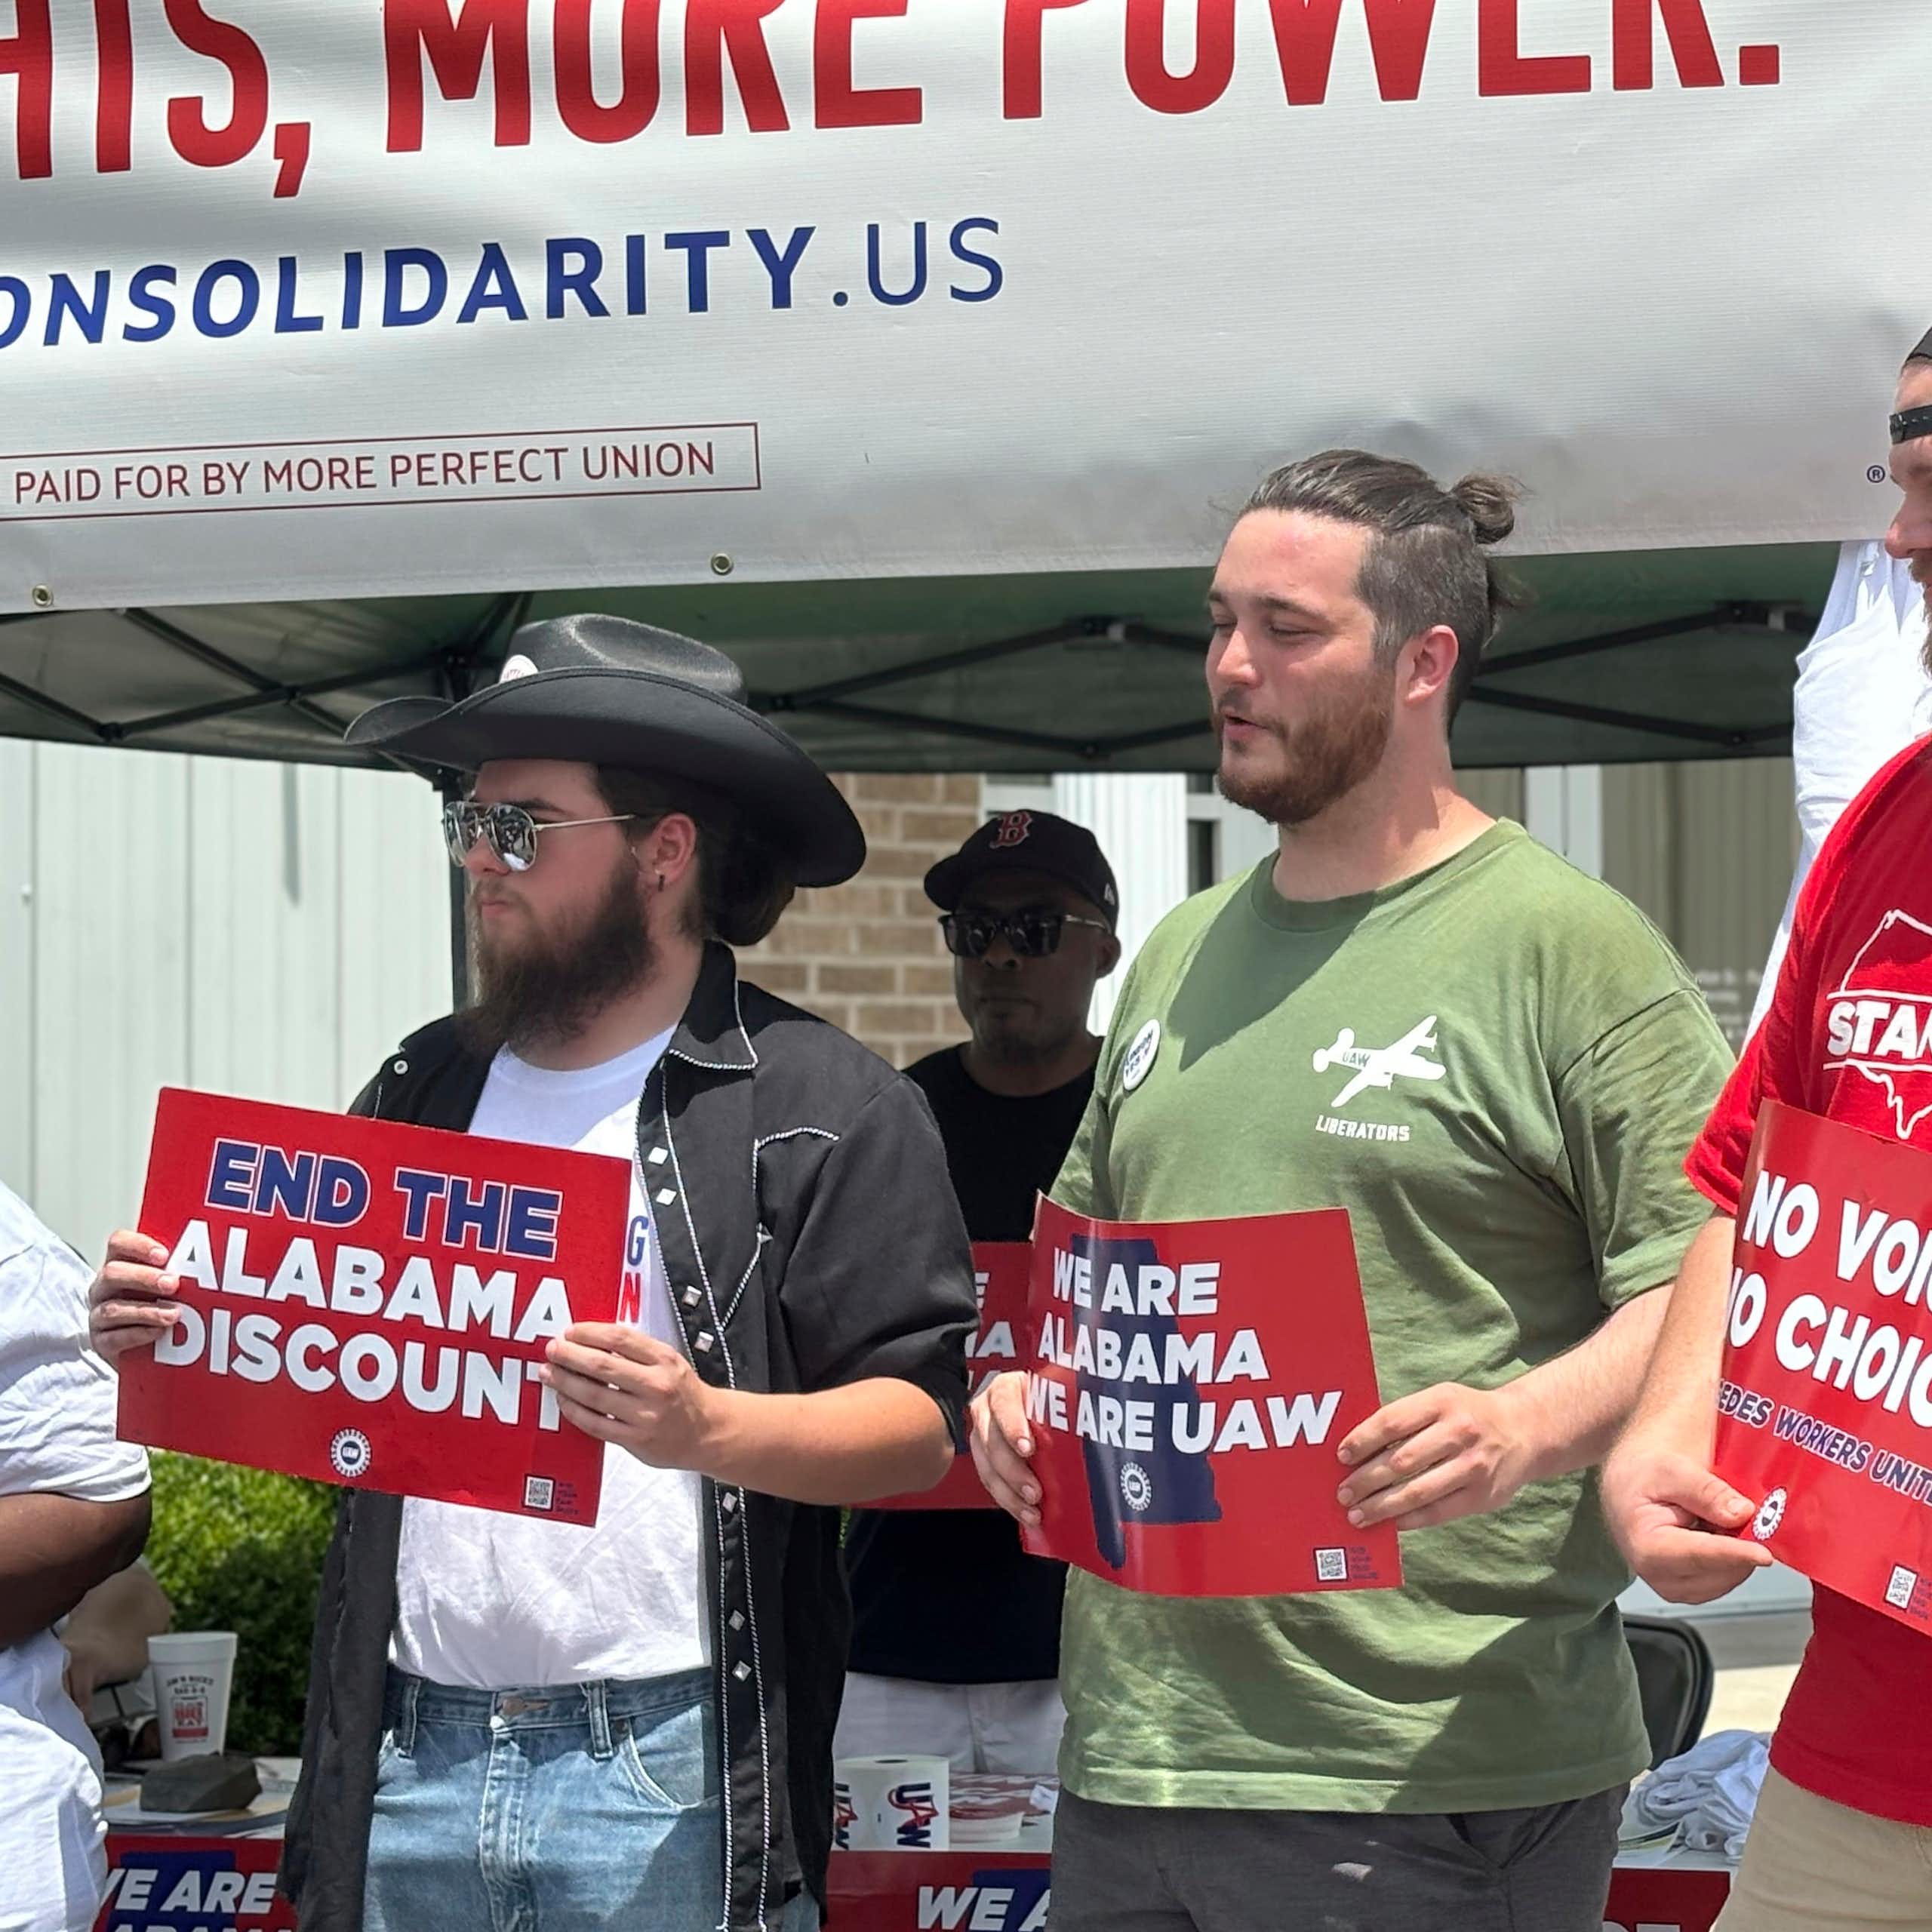 Three men hold signs in favor of the UAW and worker rights.